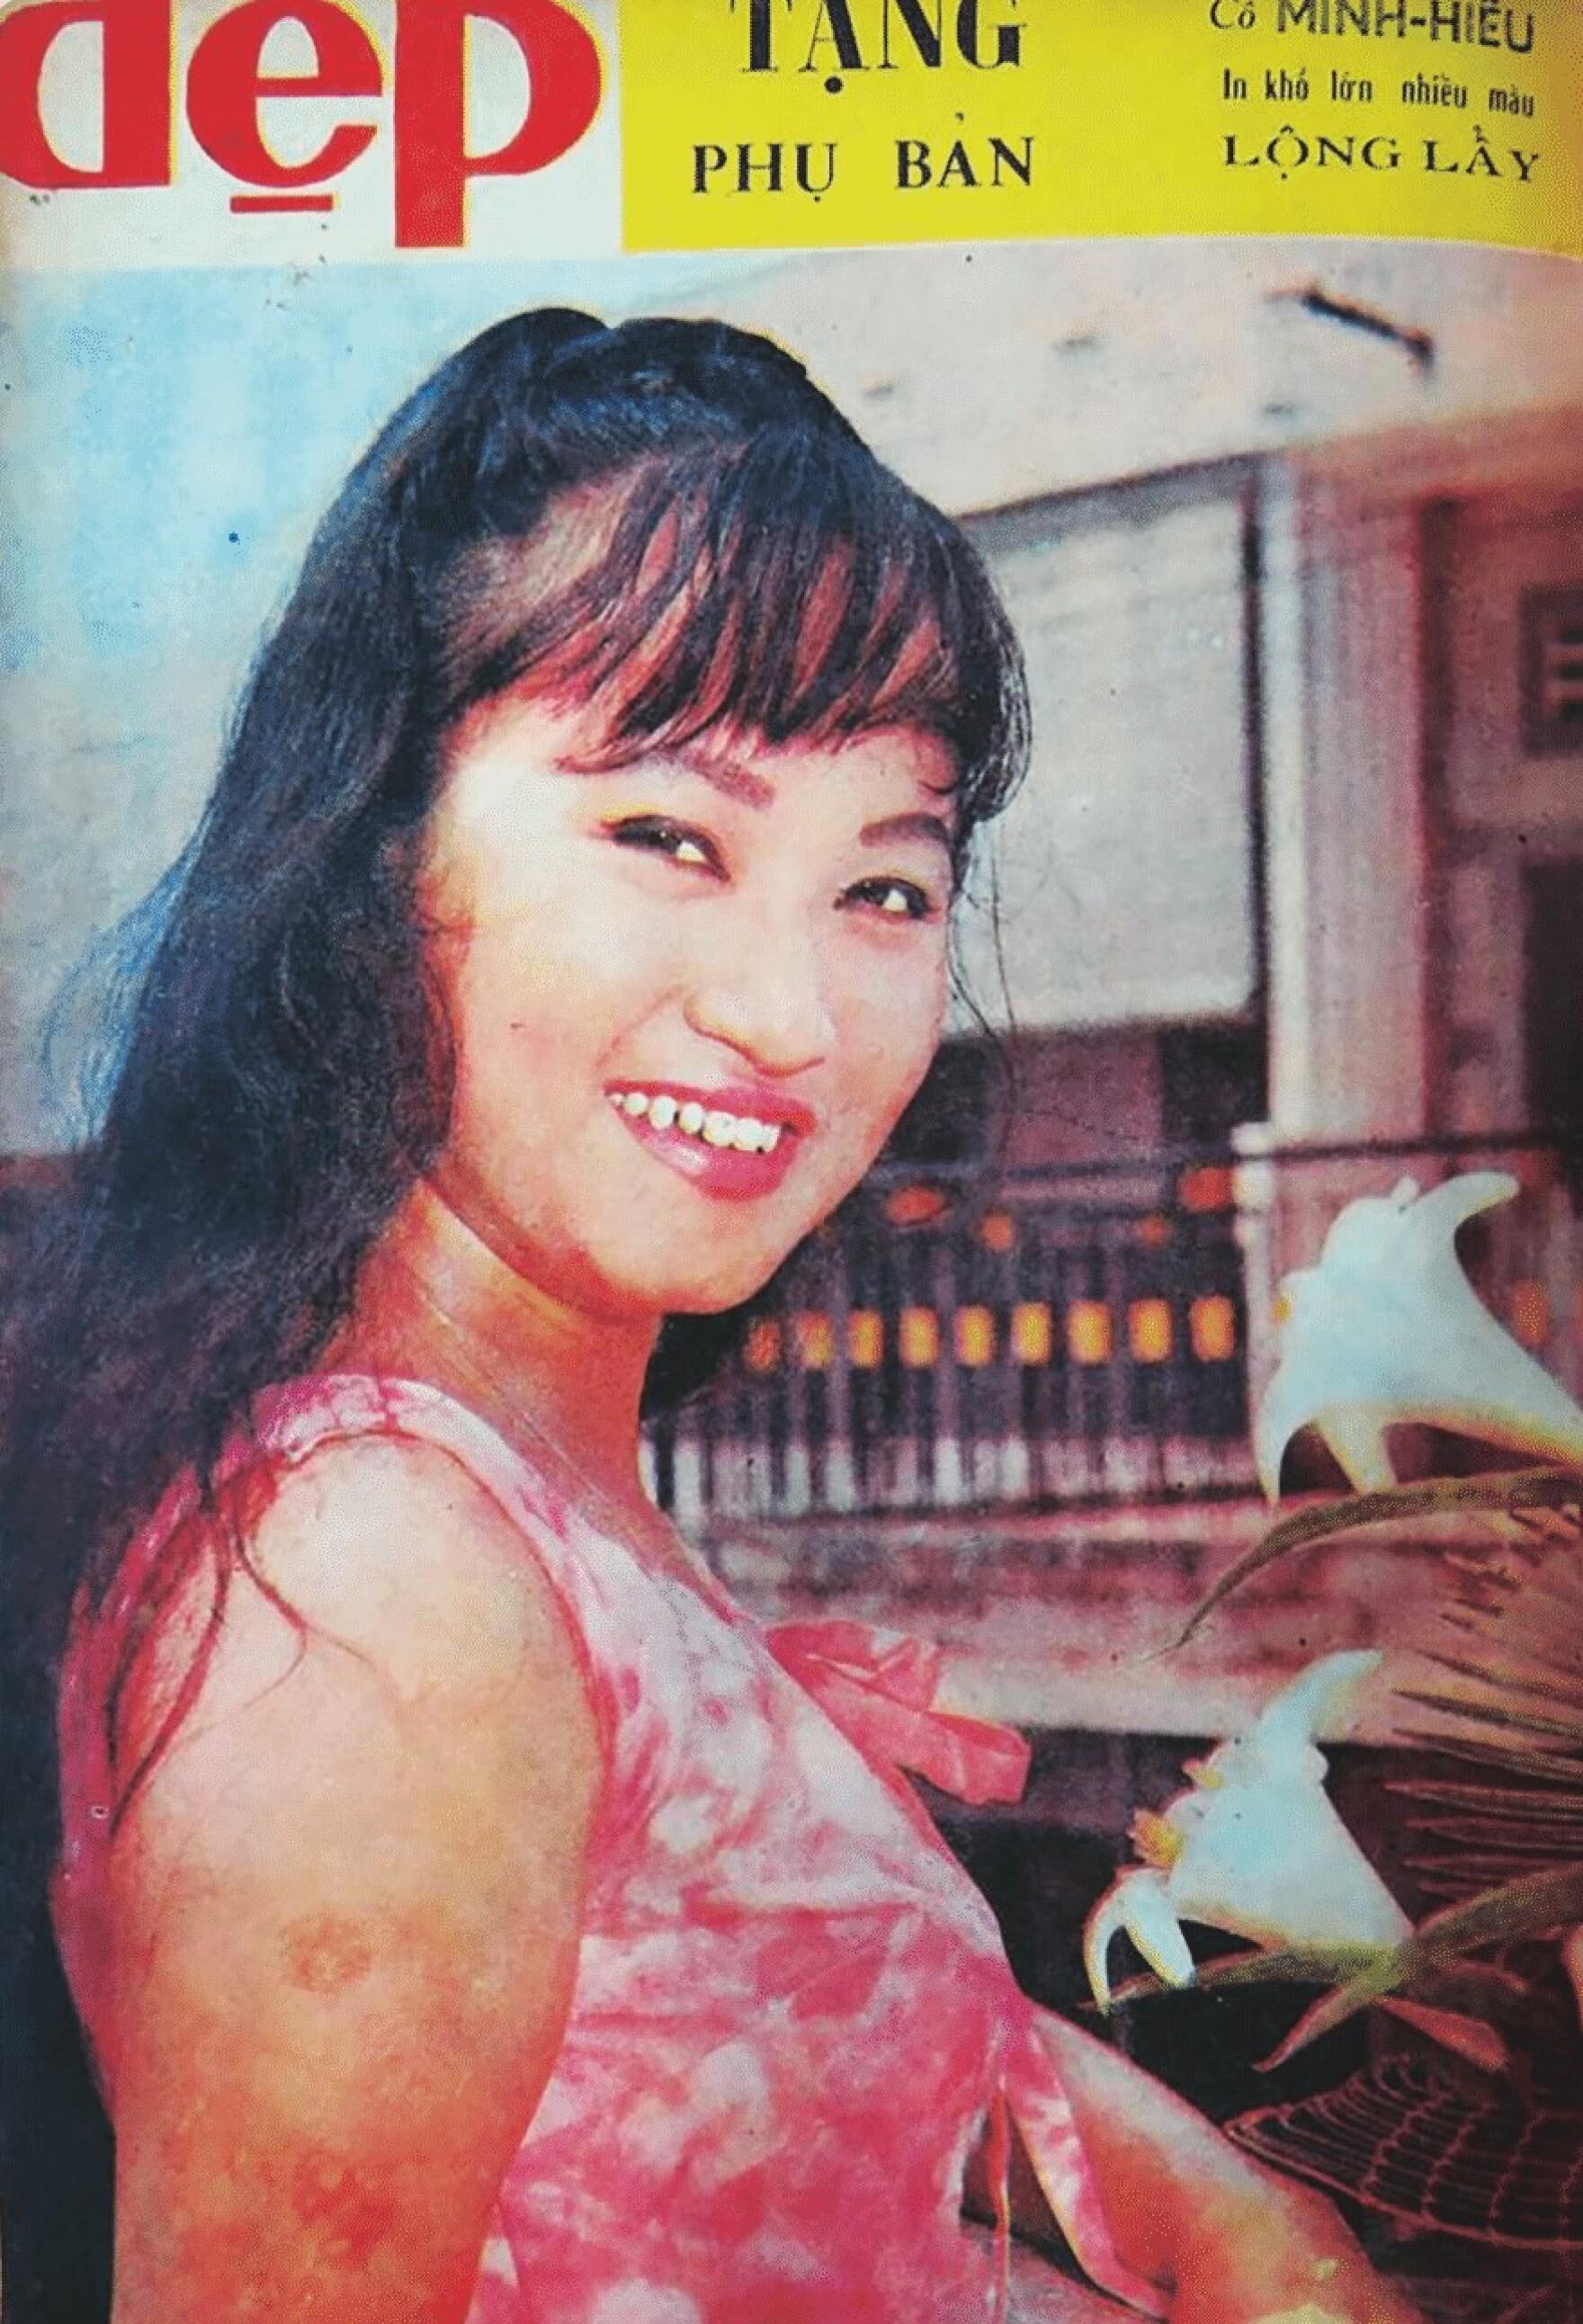 Phương Tâm on the front cover of Đẹp magazine in 1965.